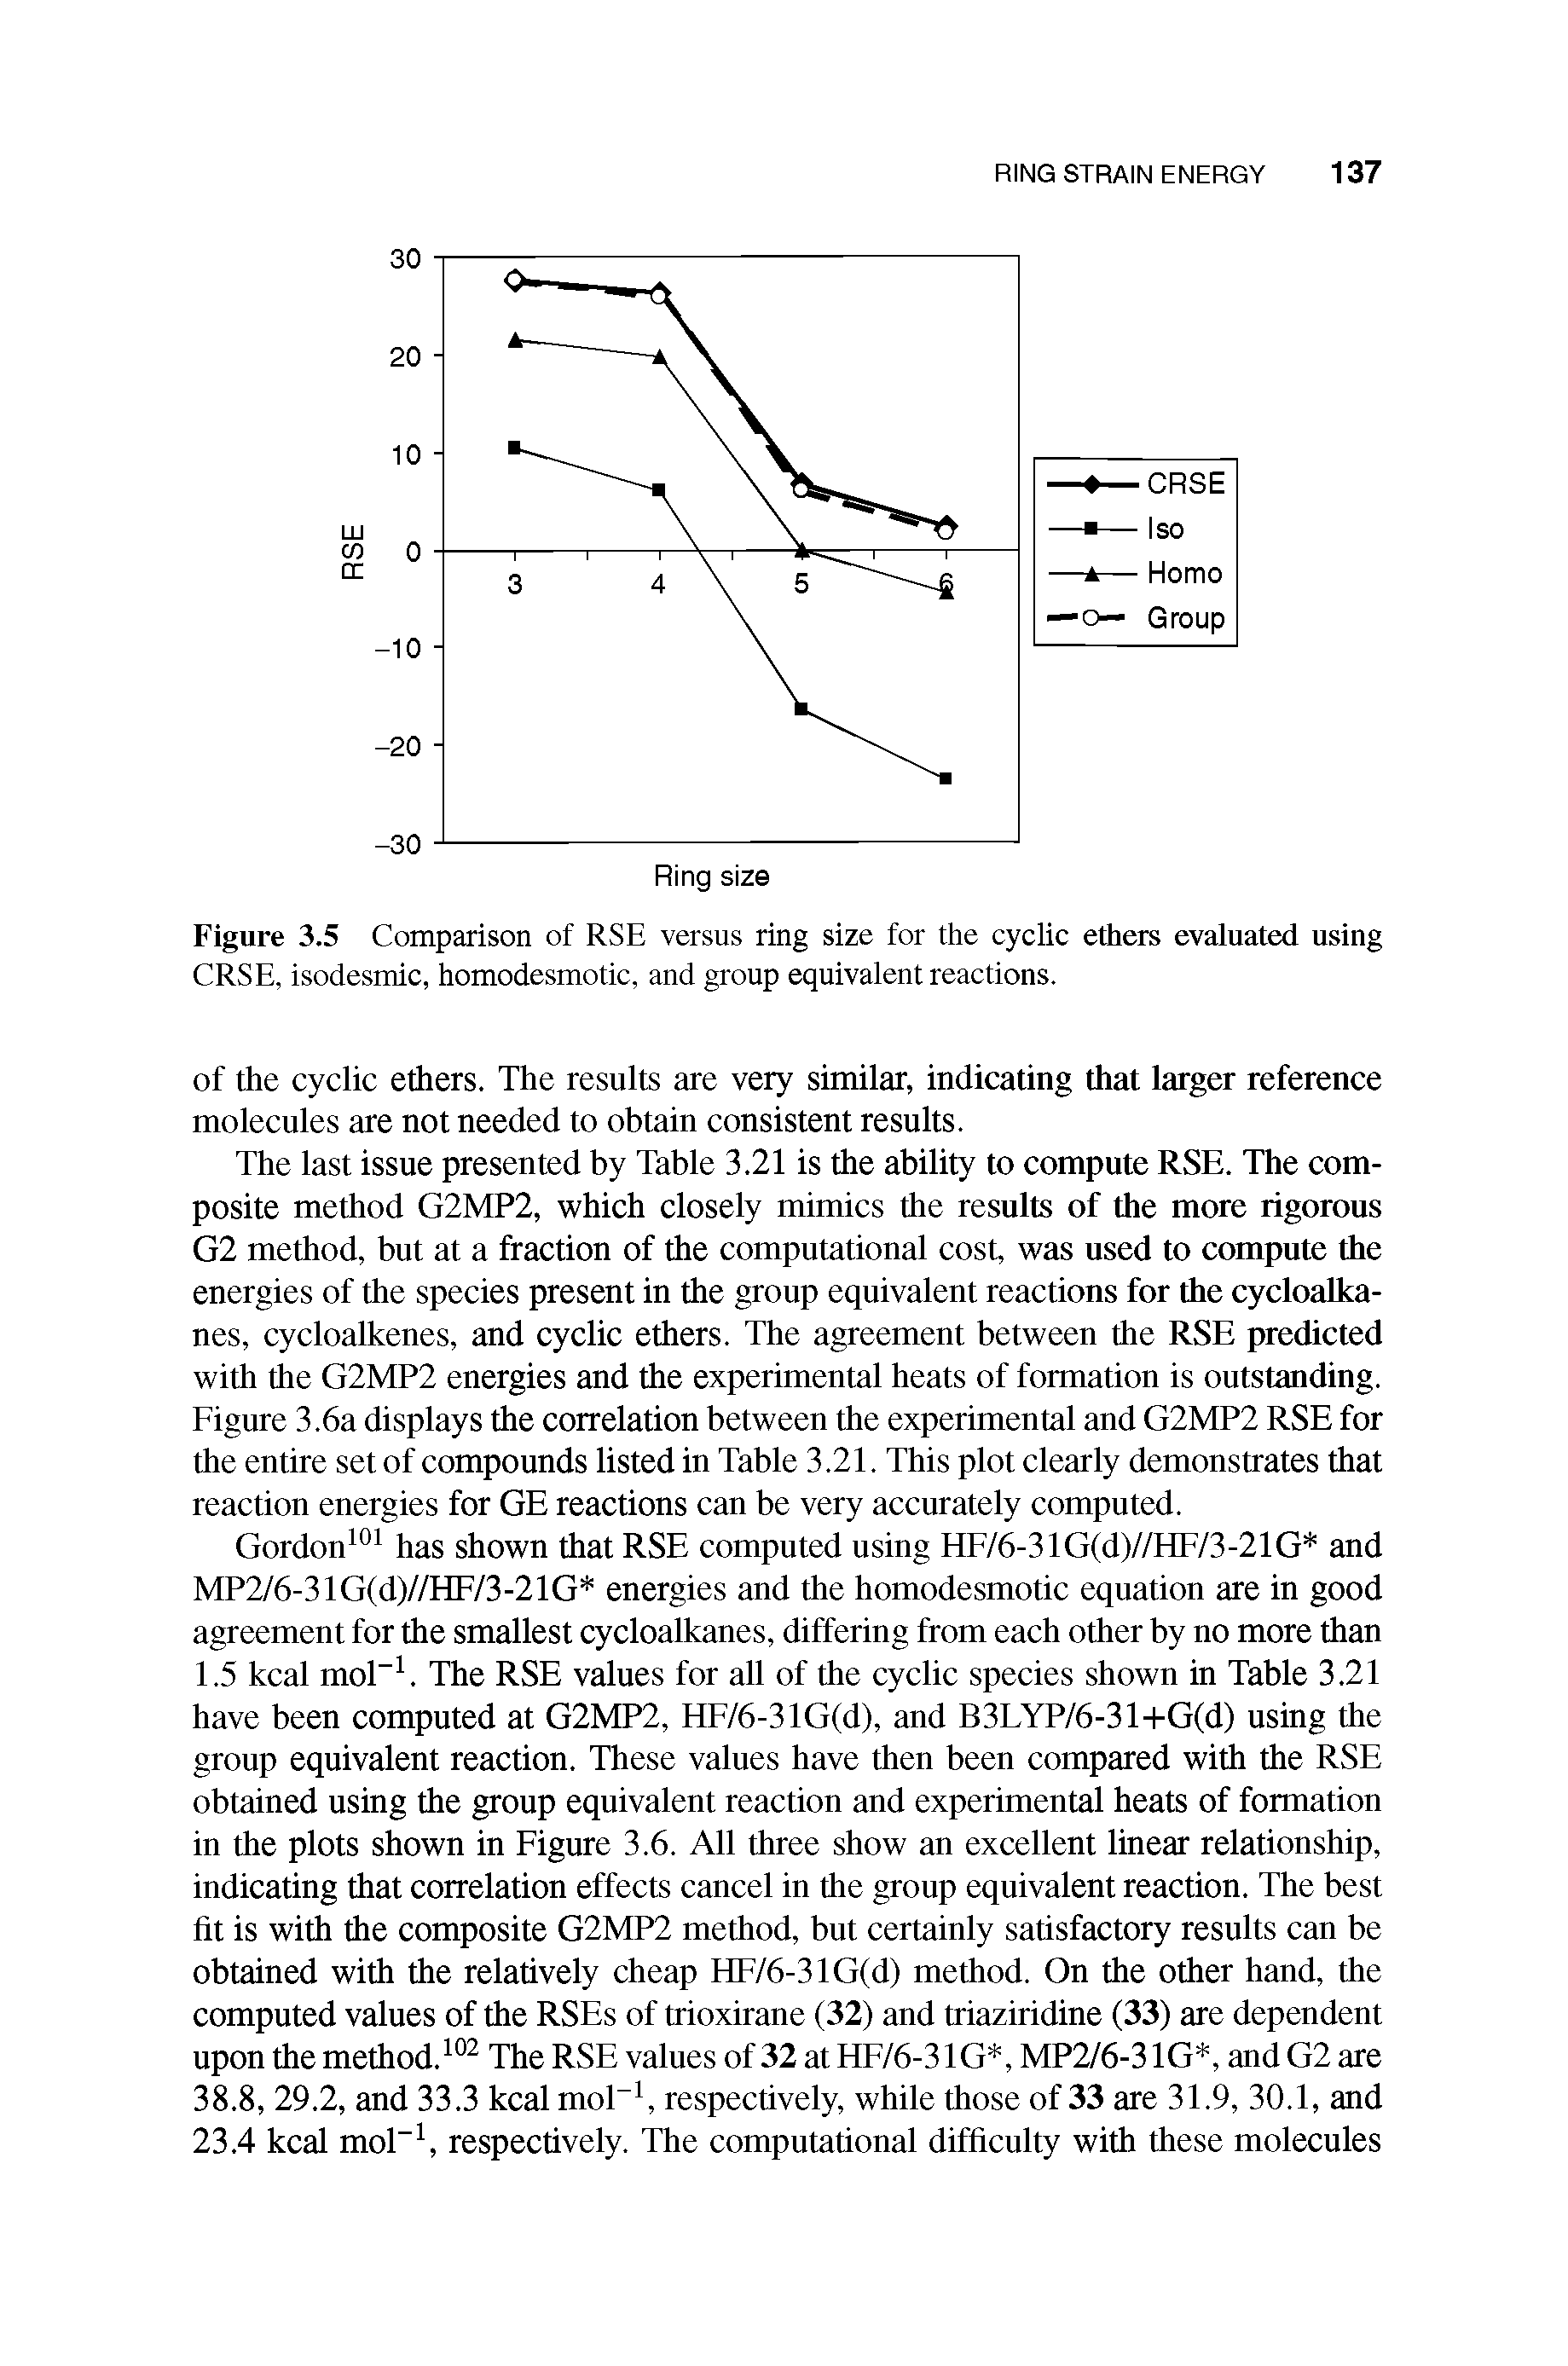 Figure 3.5 Comparison of RSE versus ring size for the cyclic ethers evaluated using CRSE, isodesmic, homodesmotic, and group equivalent reactions.